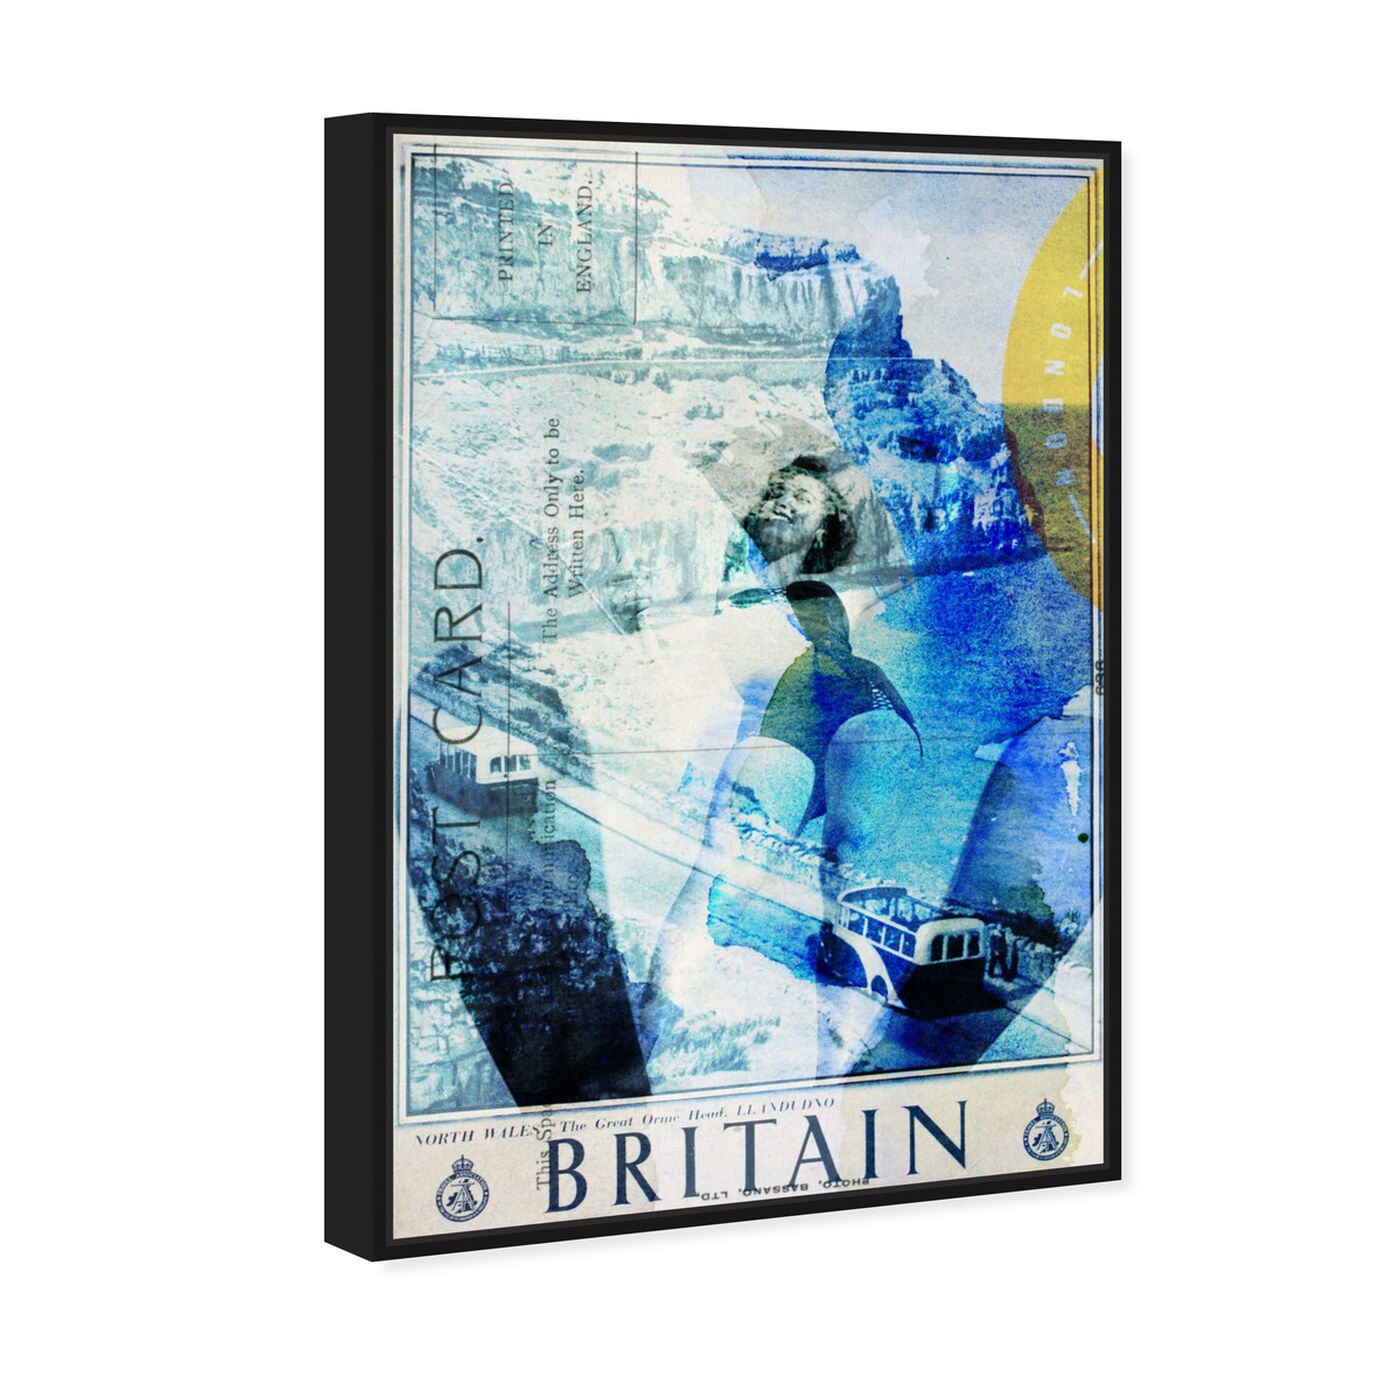 Angled view of Britain featuring advertising and posters art.